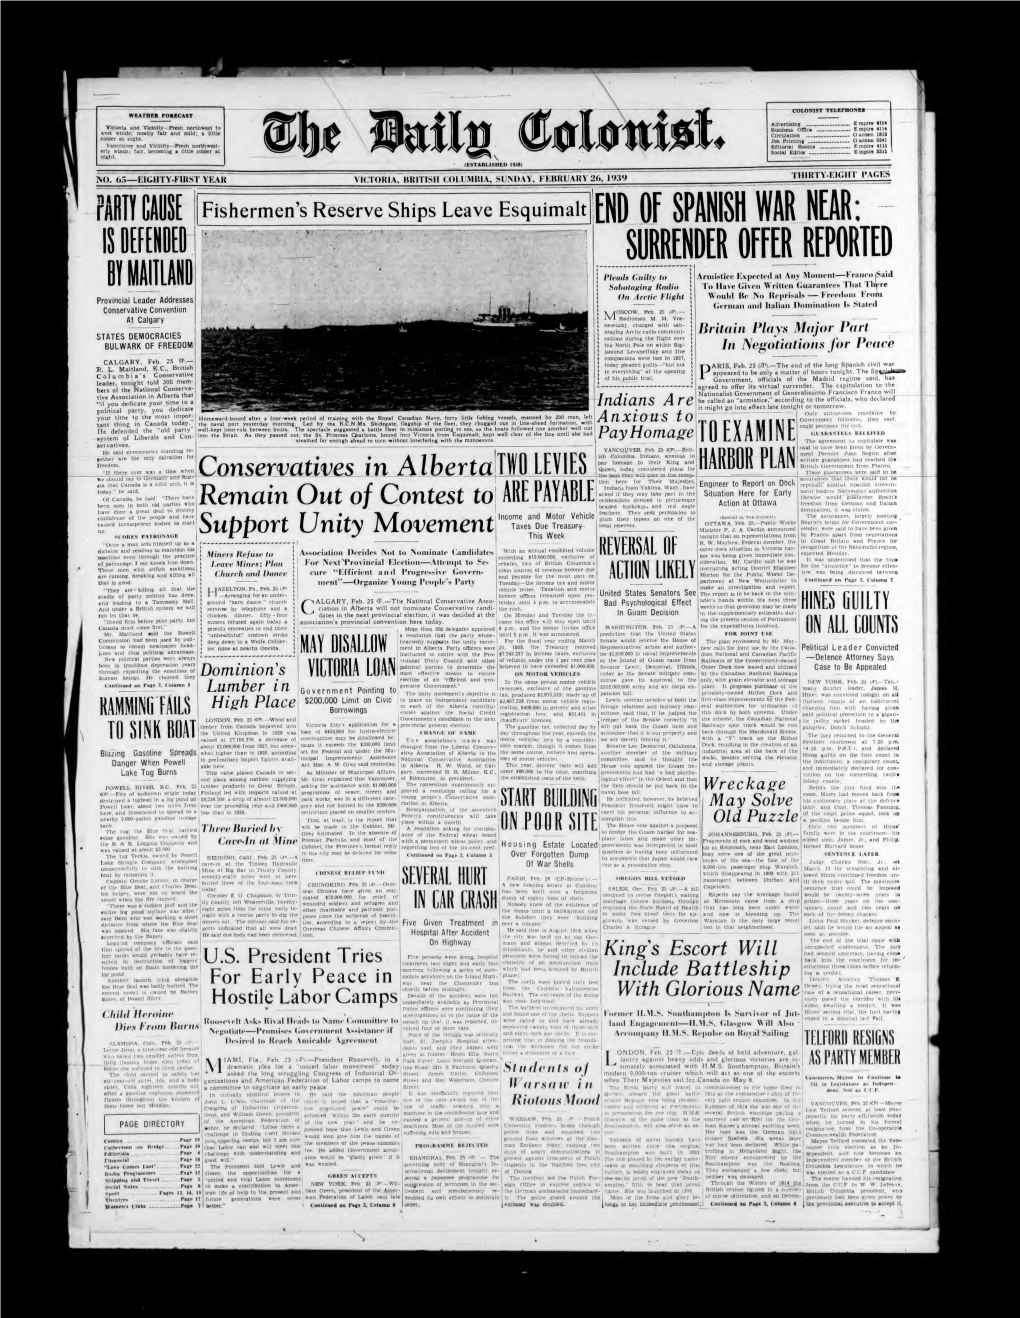 The Daily Colonist (1939-02-26)